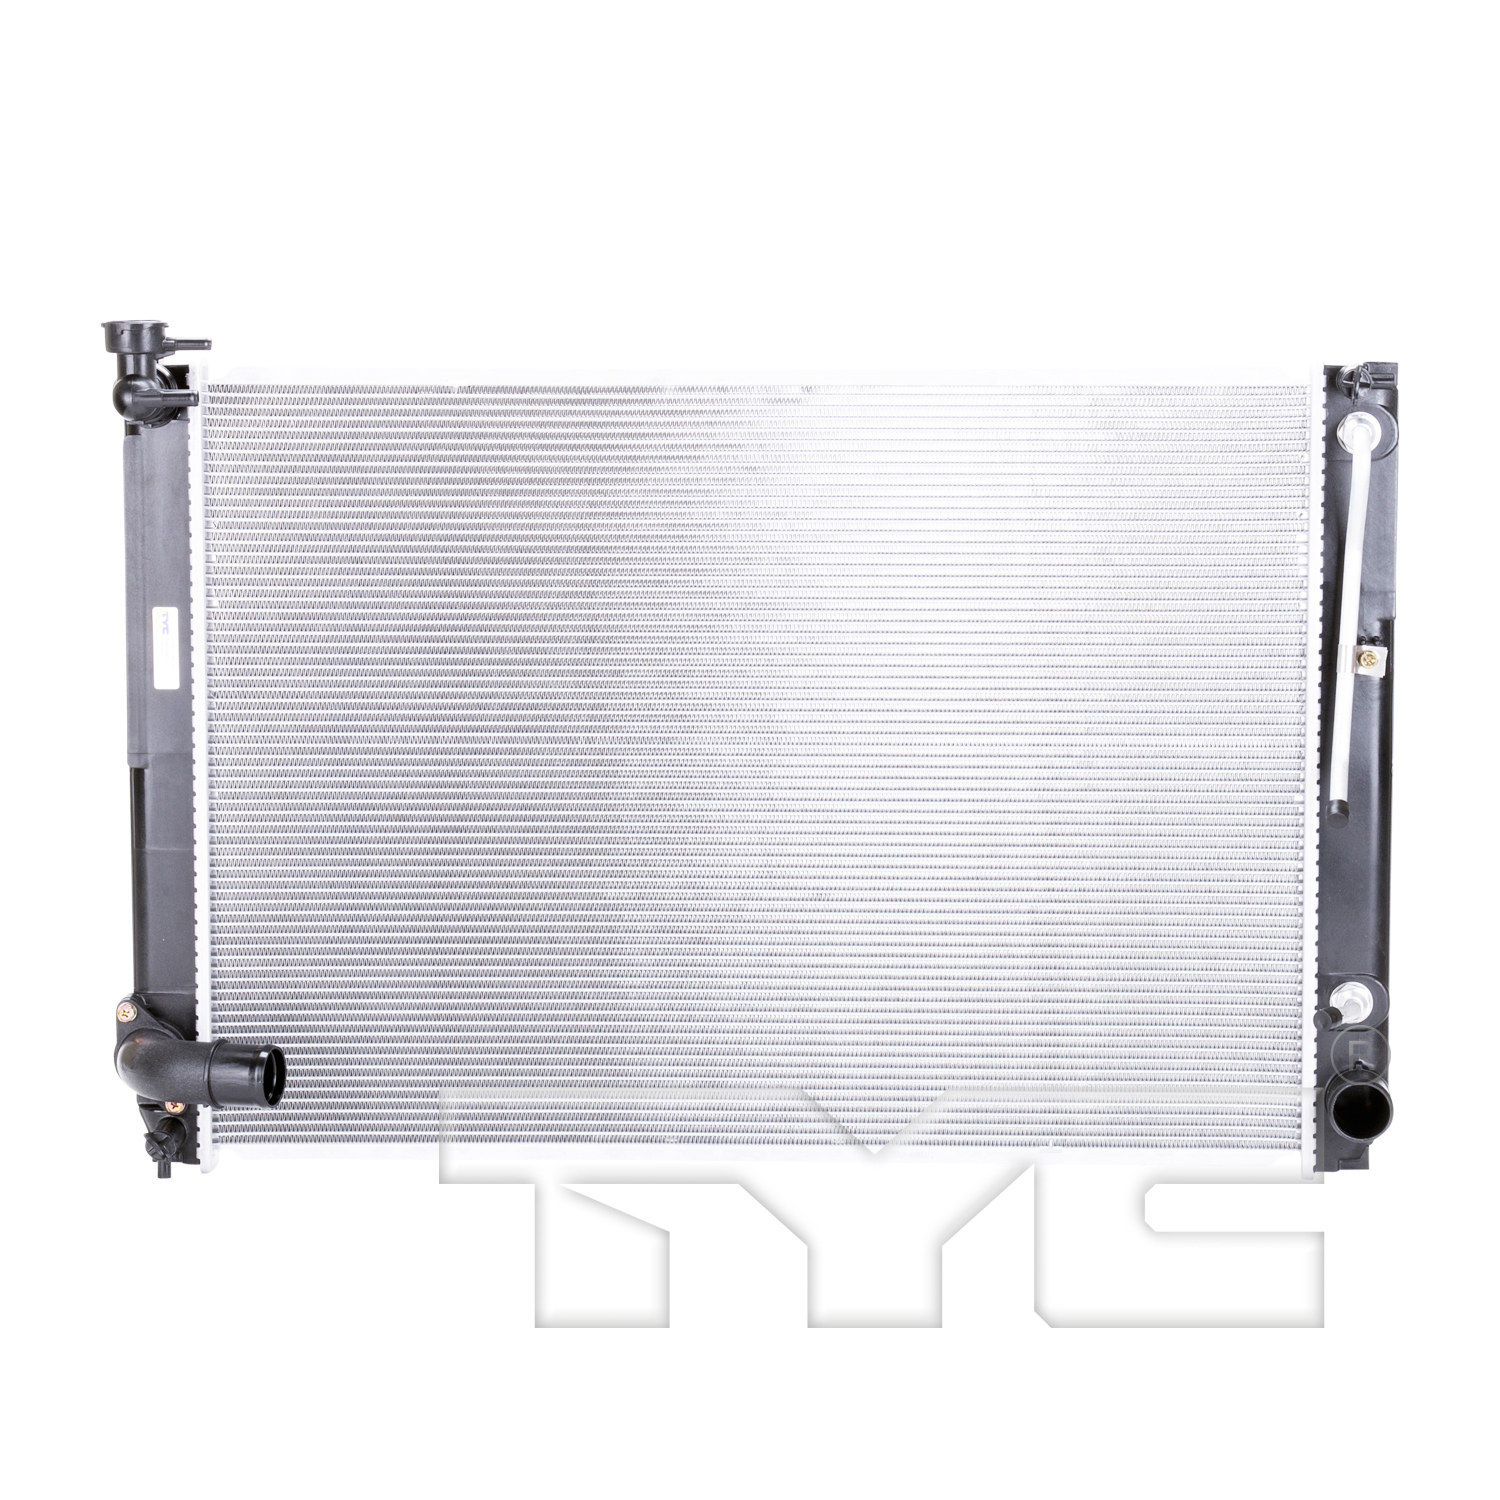 Aftermarket RADIATORS for LEXUS - RX350, RX350,07-09,Radiator assembly